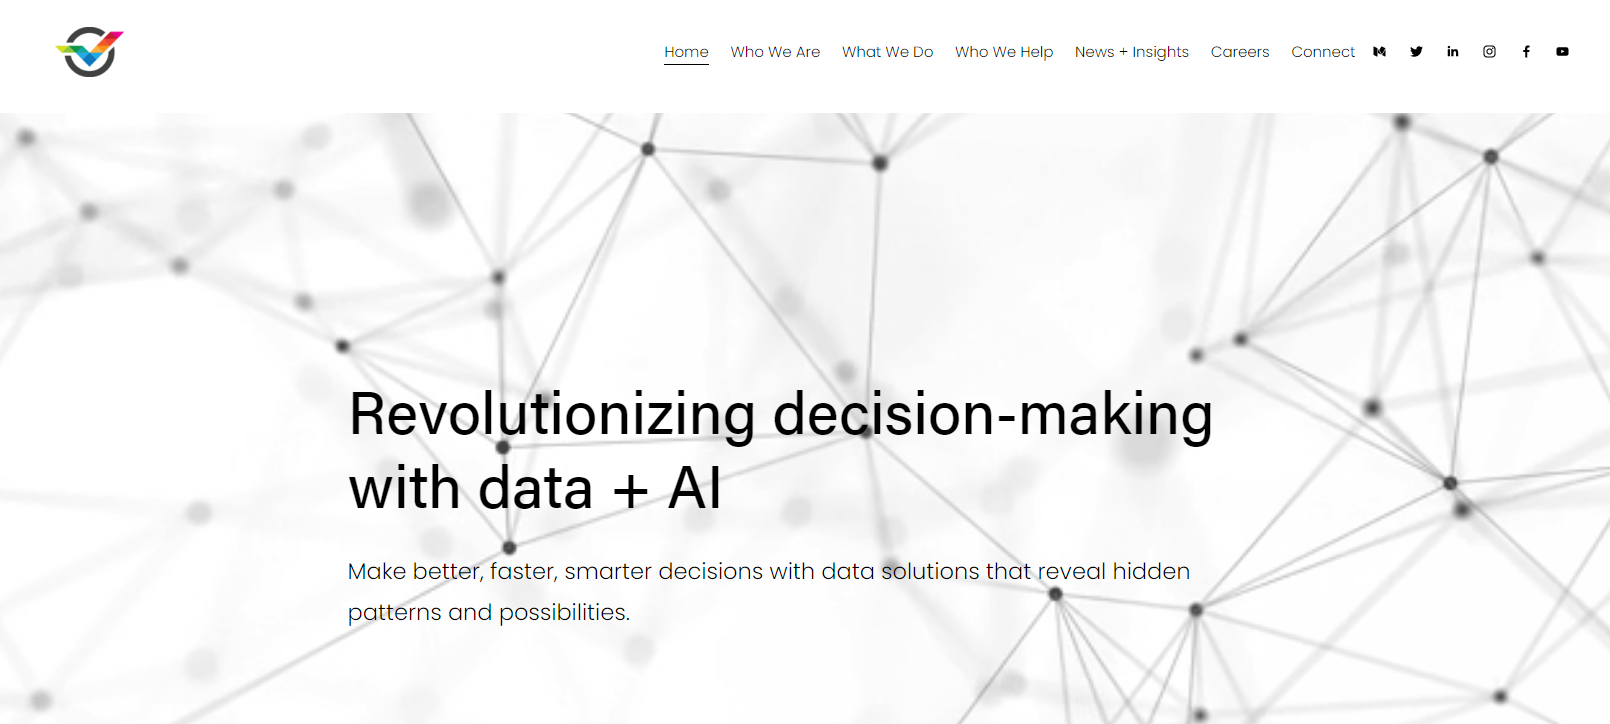 RS21 Secures $3 Million in Funding Led by Thayer Ventures to Propel Global Data Science Solutions